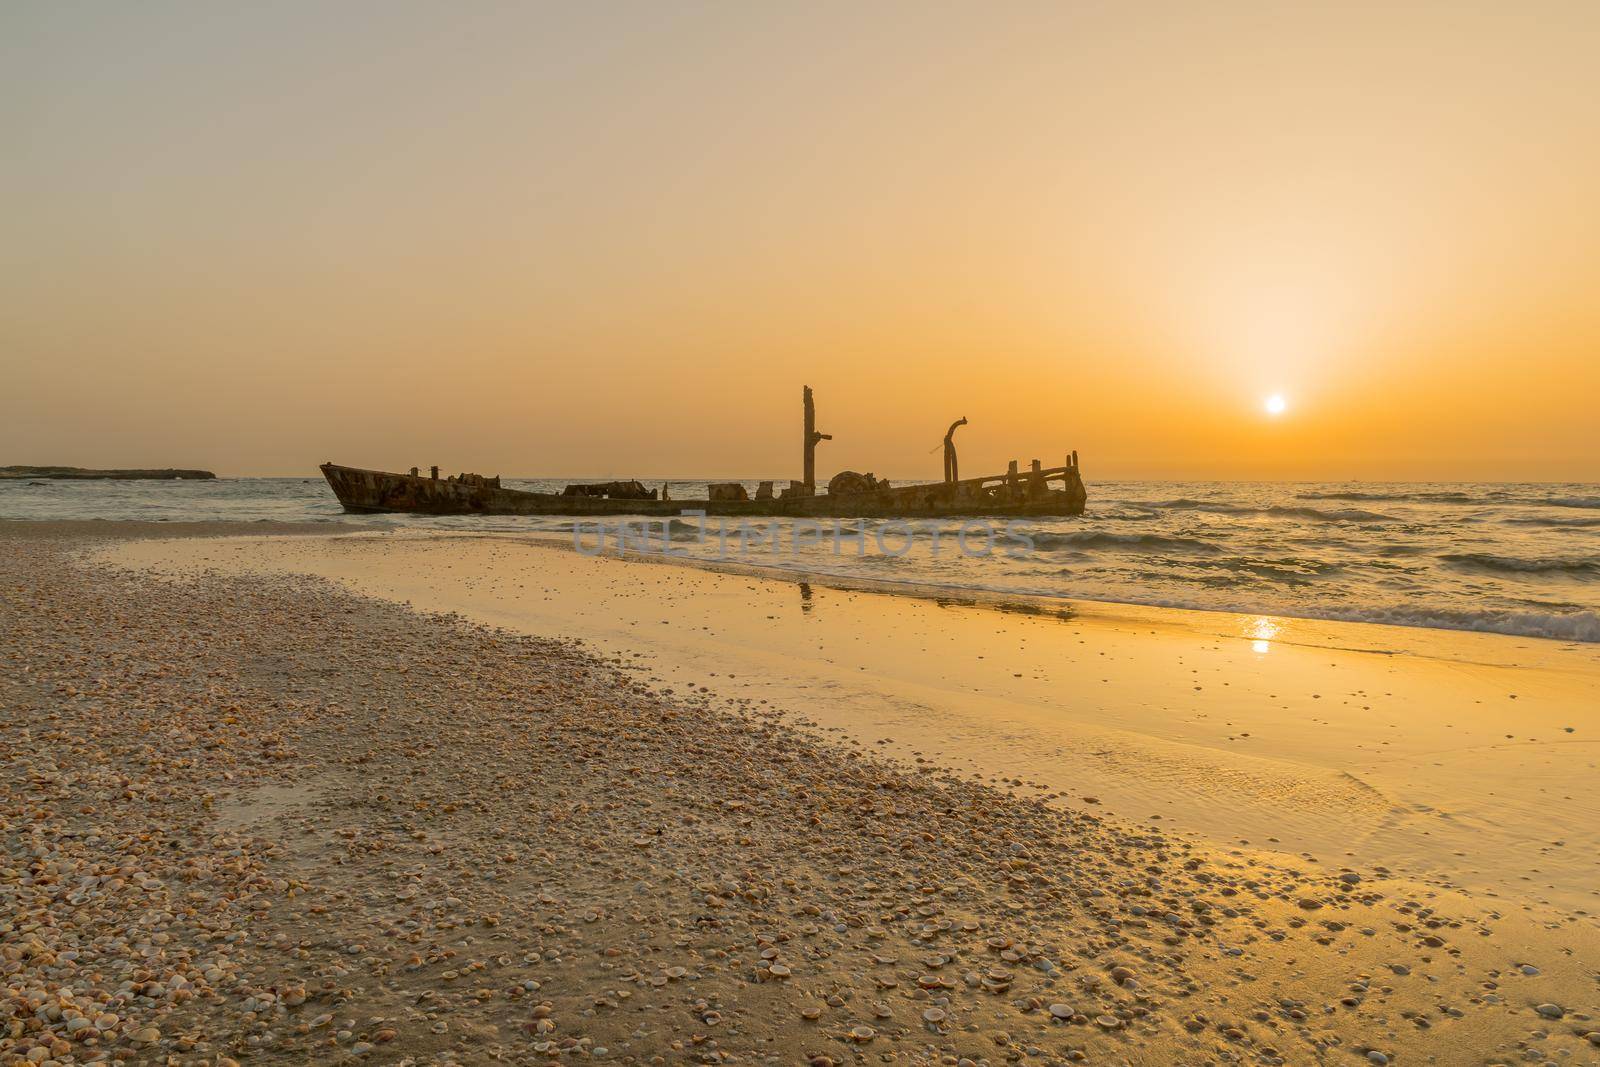 Sunset view of a rusty shipwreck in HaBonim Beach, Northern Israel